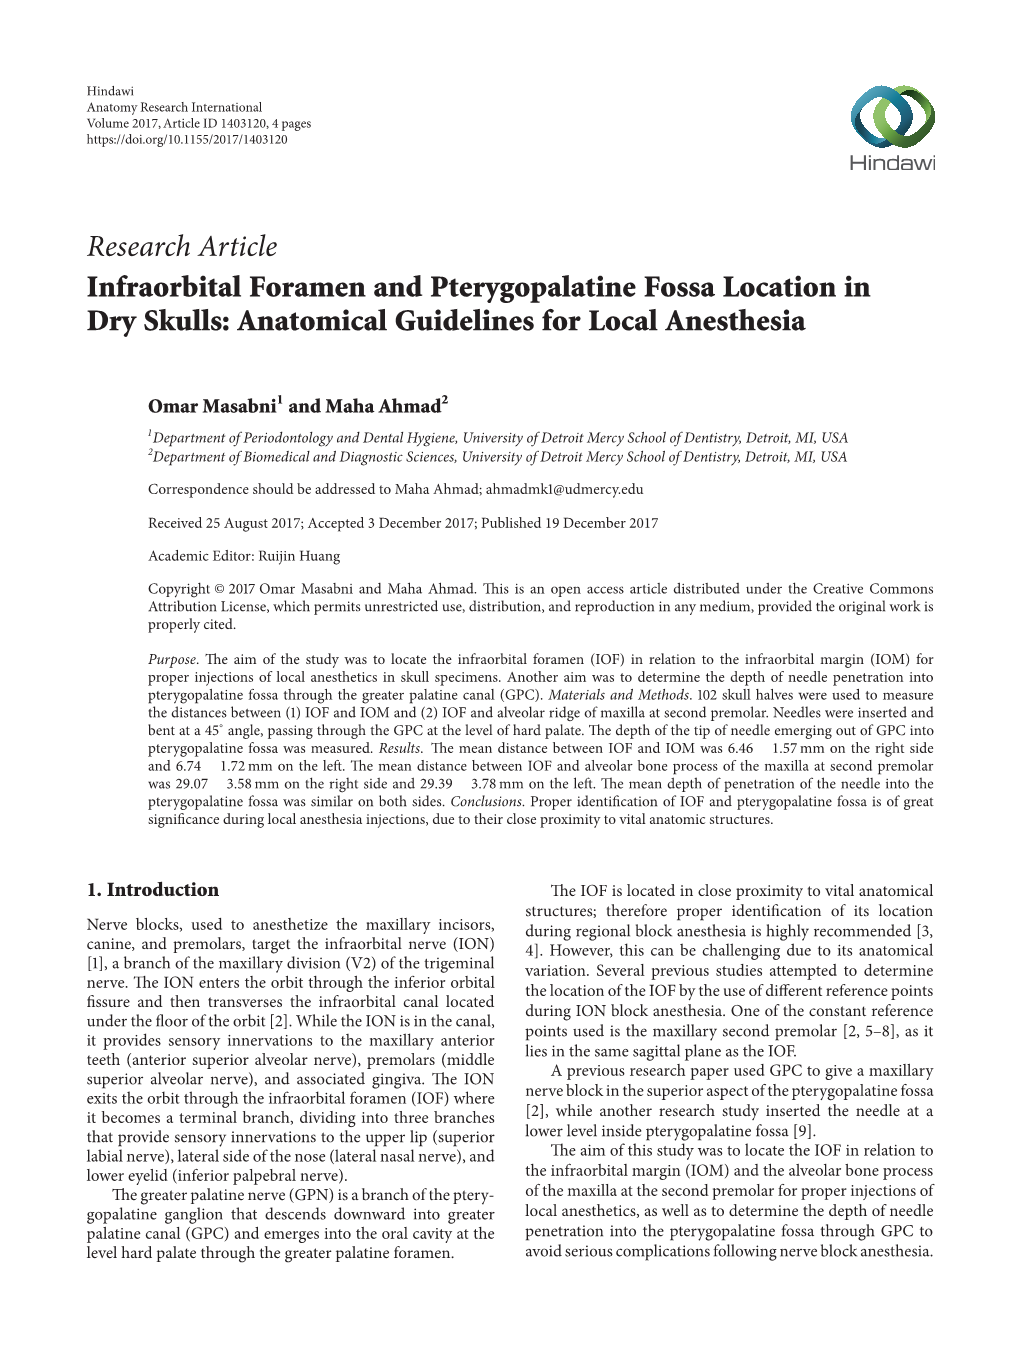 Infraorbital Foramen and Pterygopalatine Fossa Location in Dry Skulls: Anatomical Guidelines for Local Anesthesia